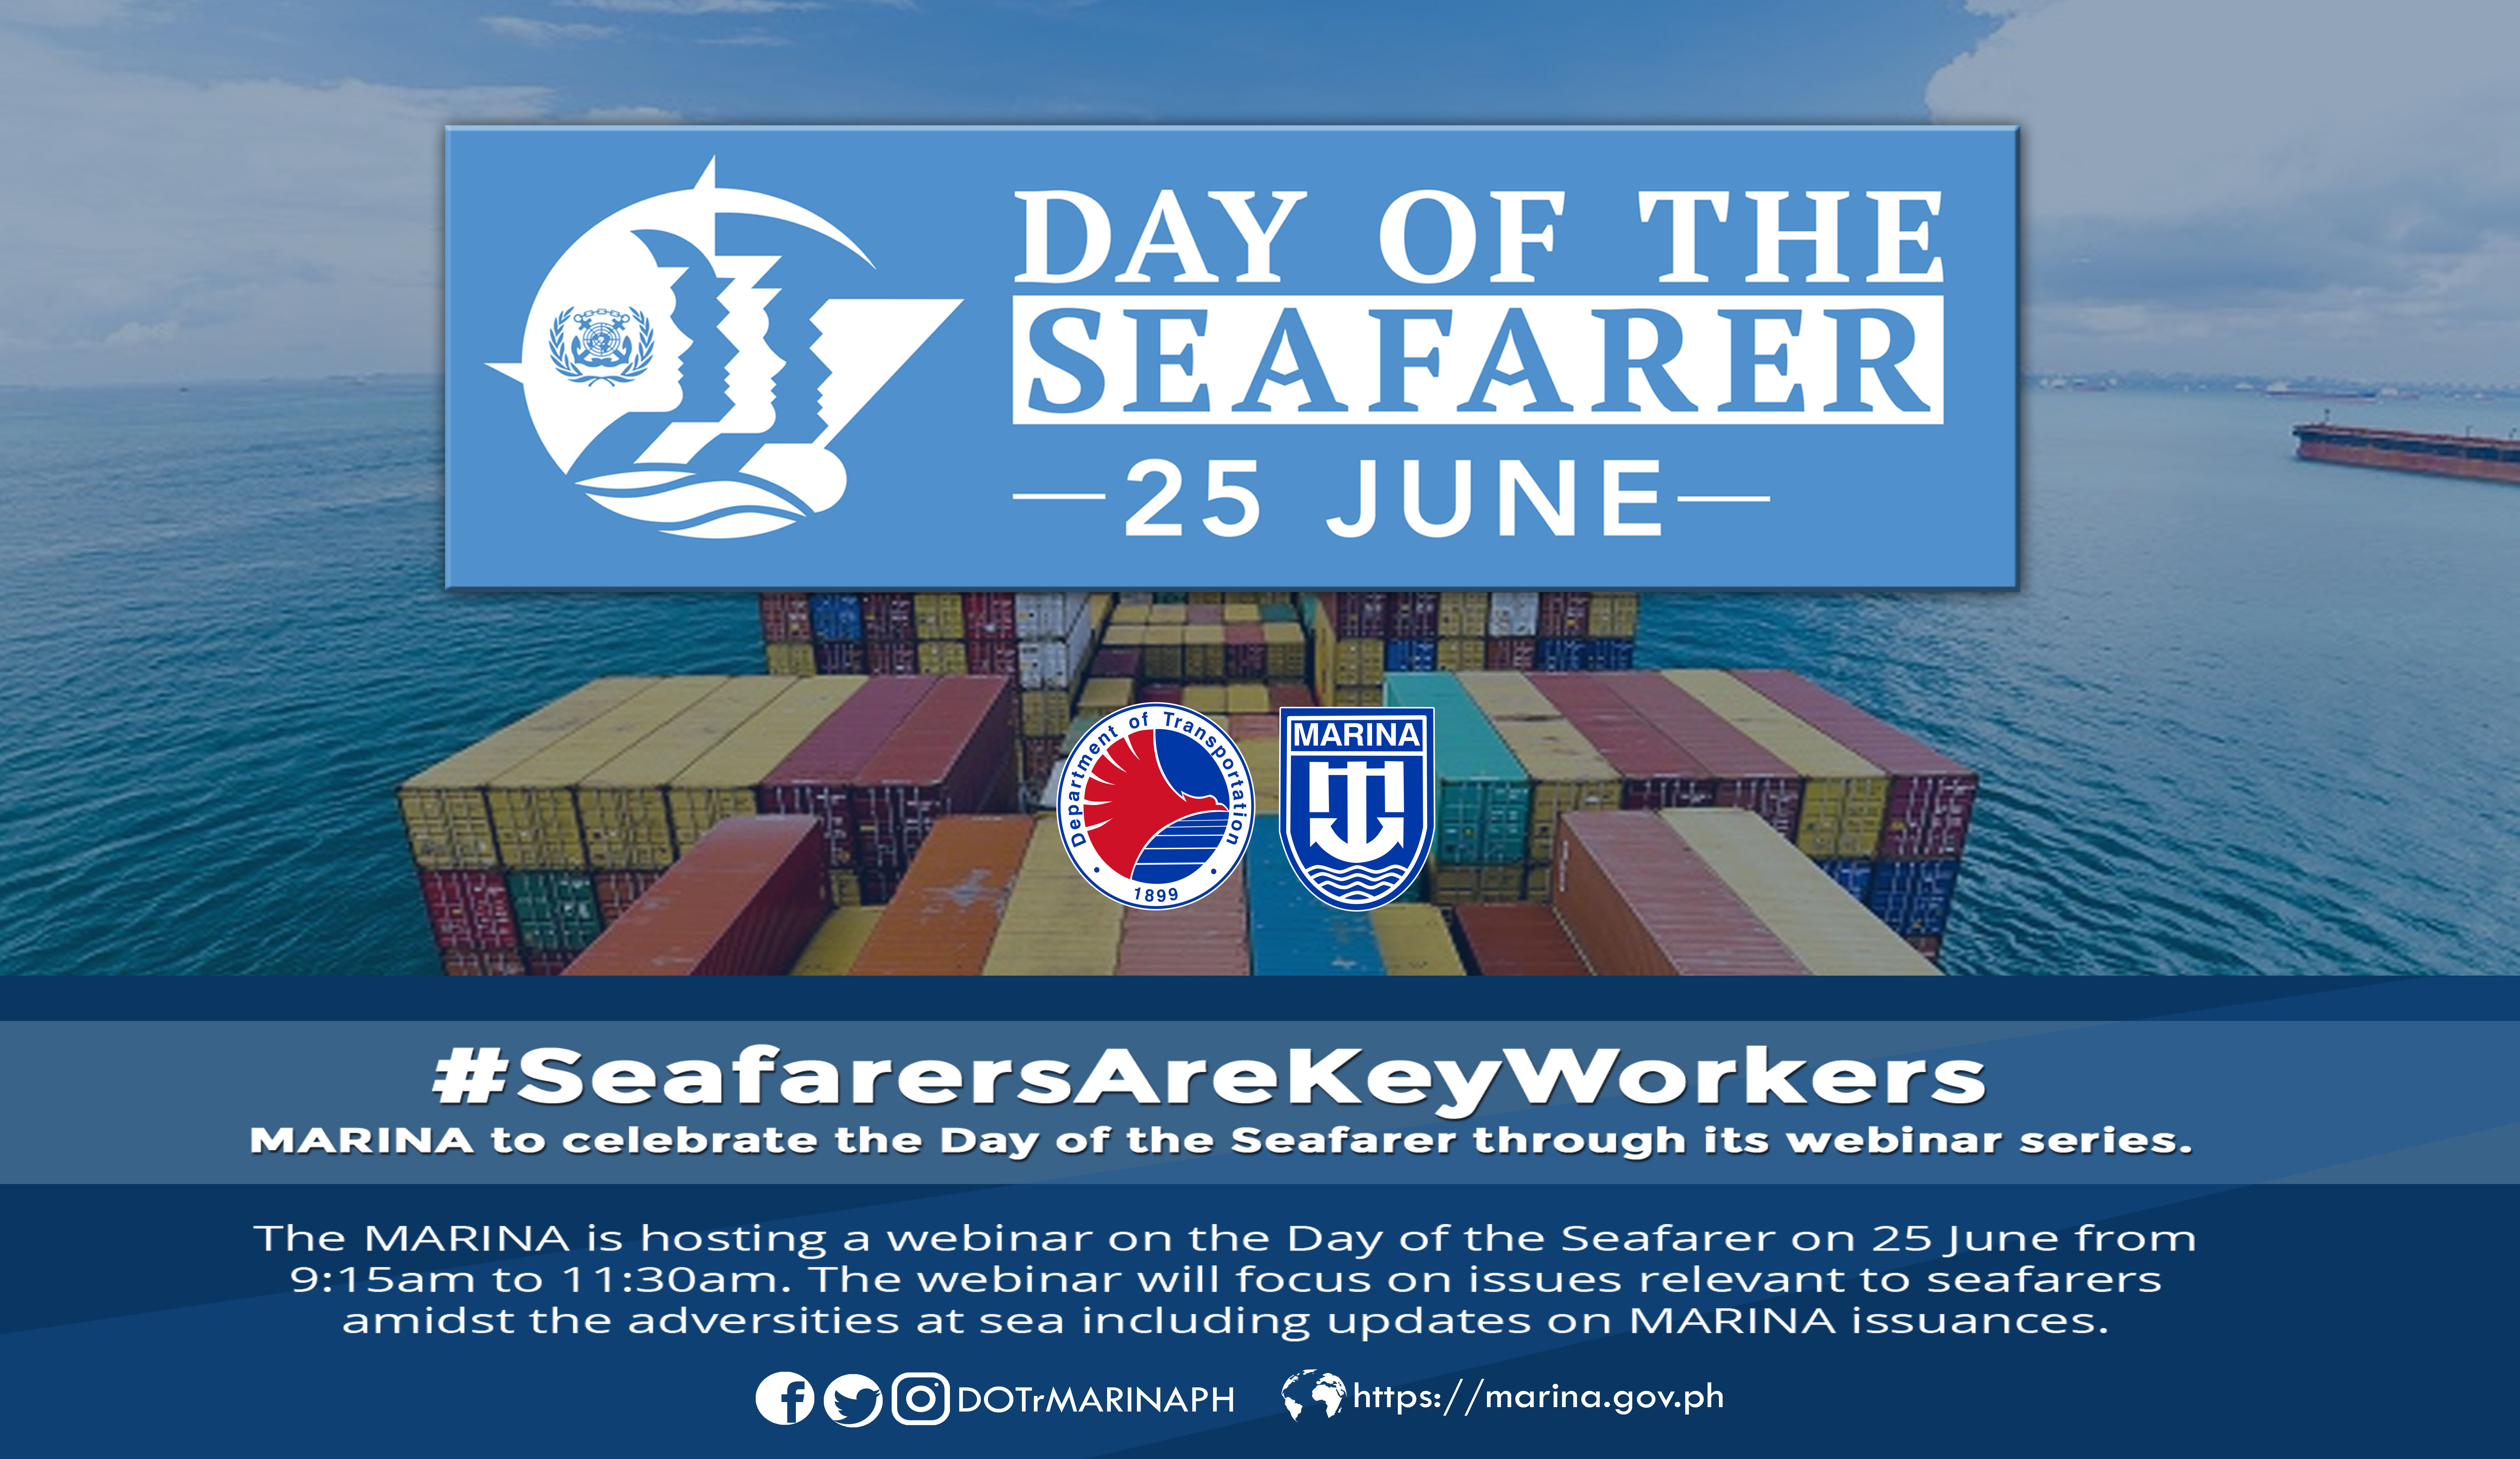 Day of the Seafarer Advancer